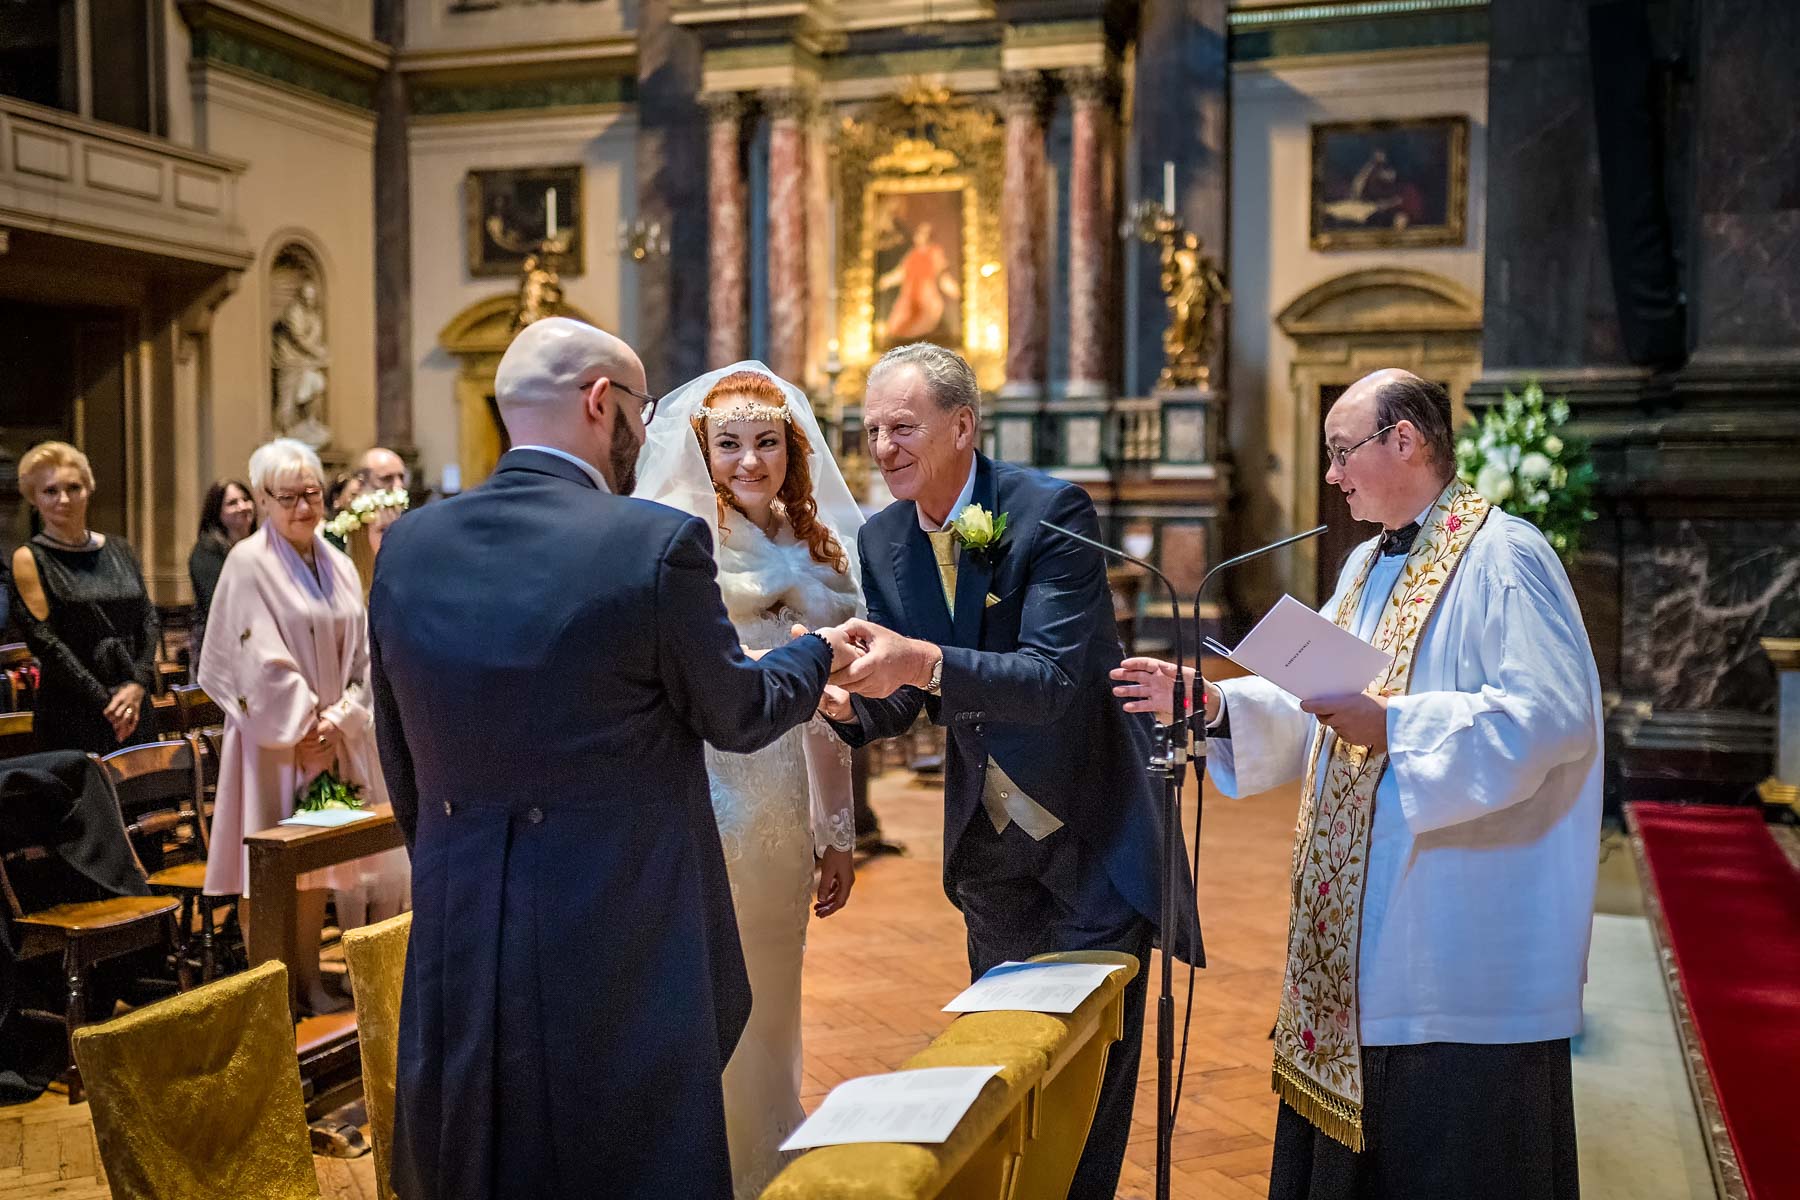 The bride's father gives away the bride to her groom at a Brompton Oratory wedding ceremony